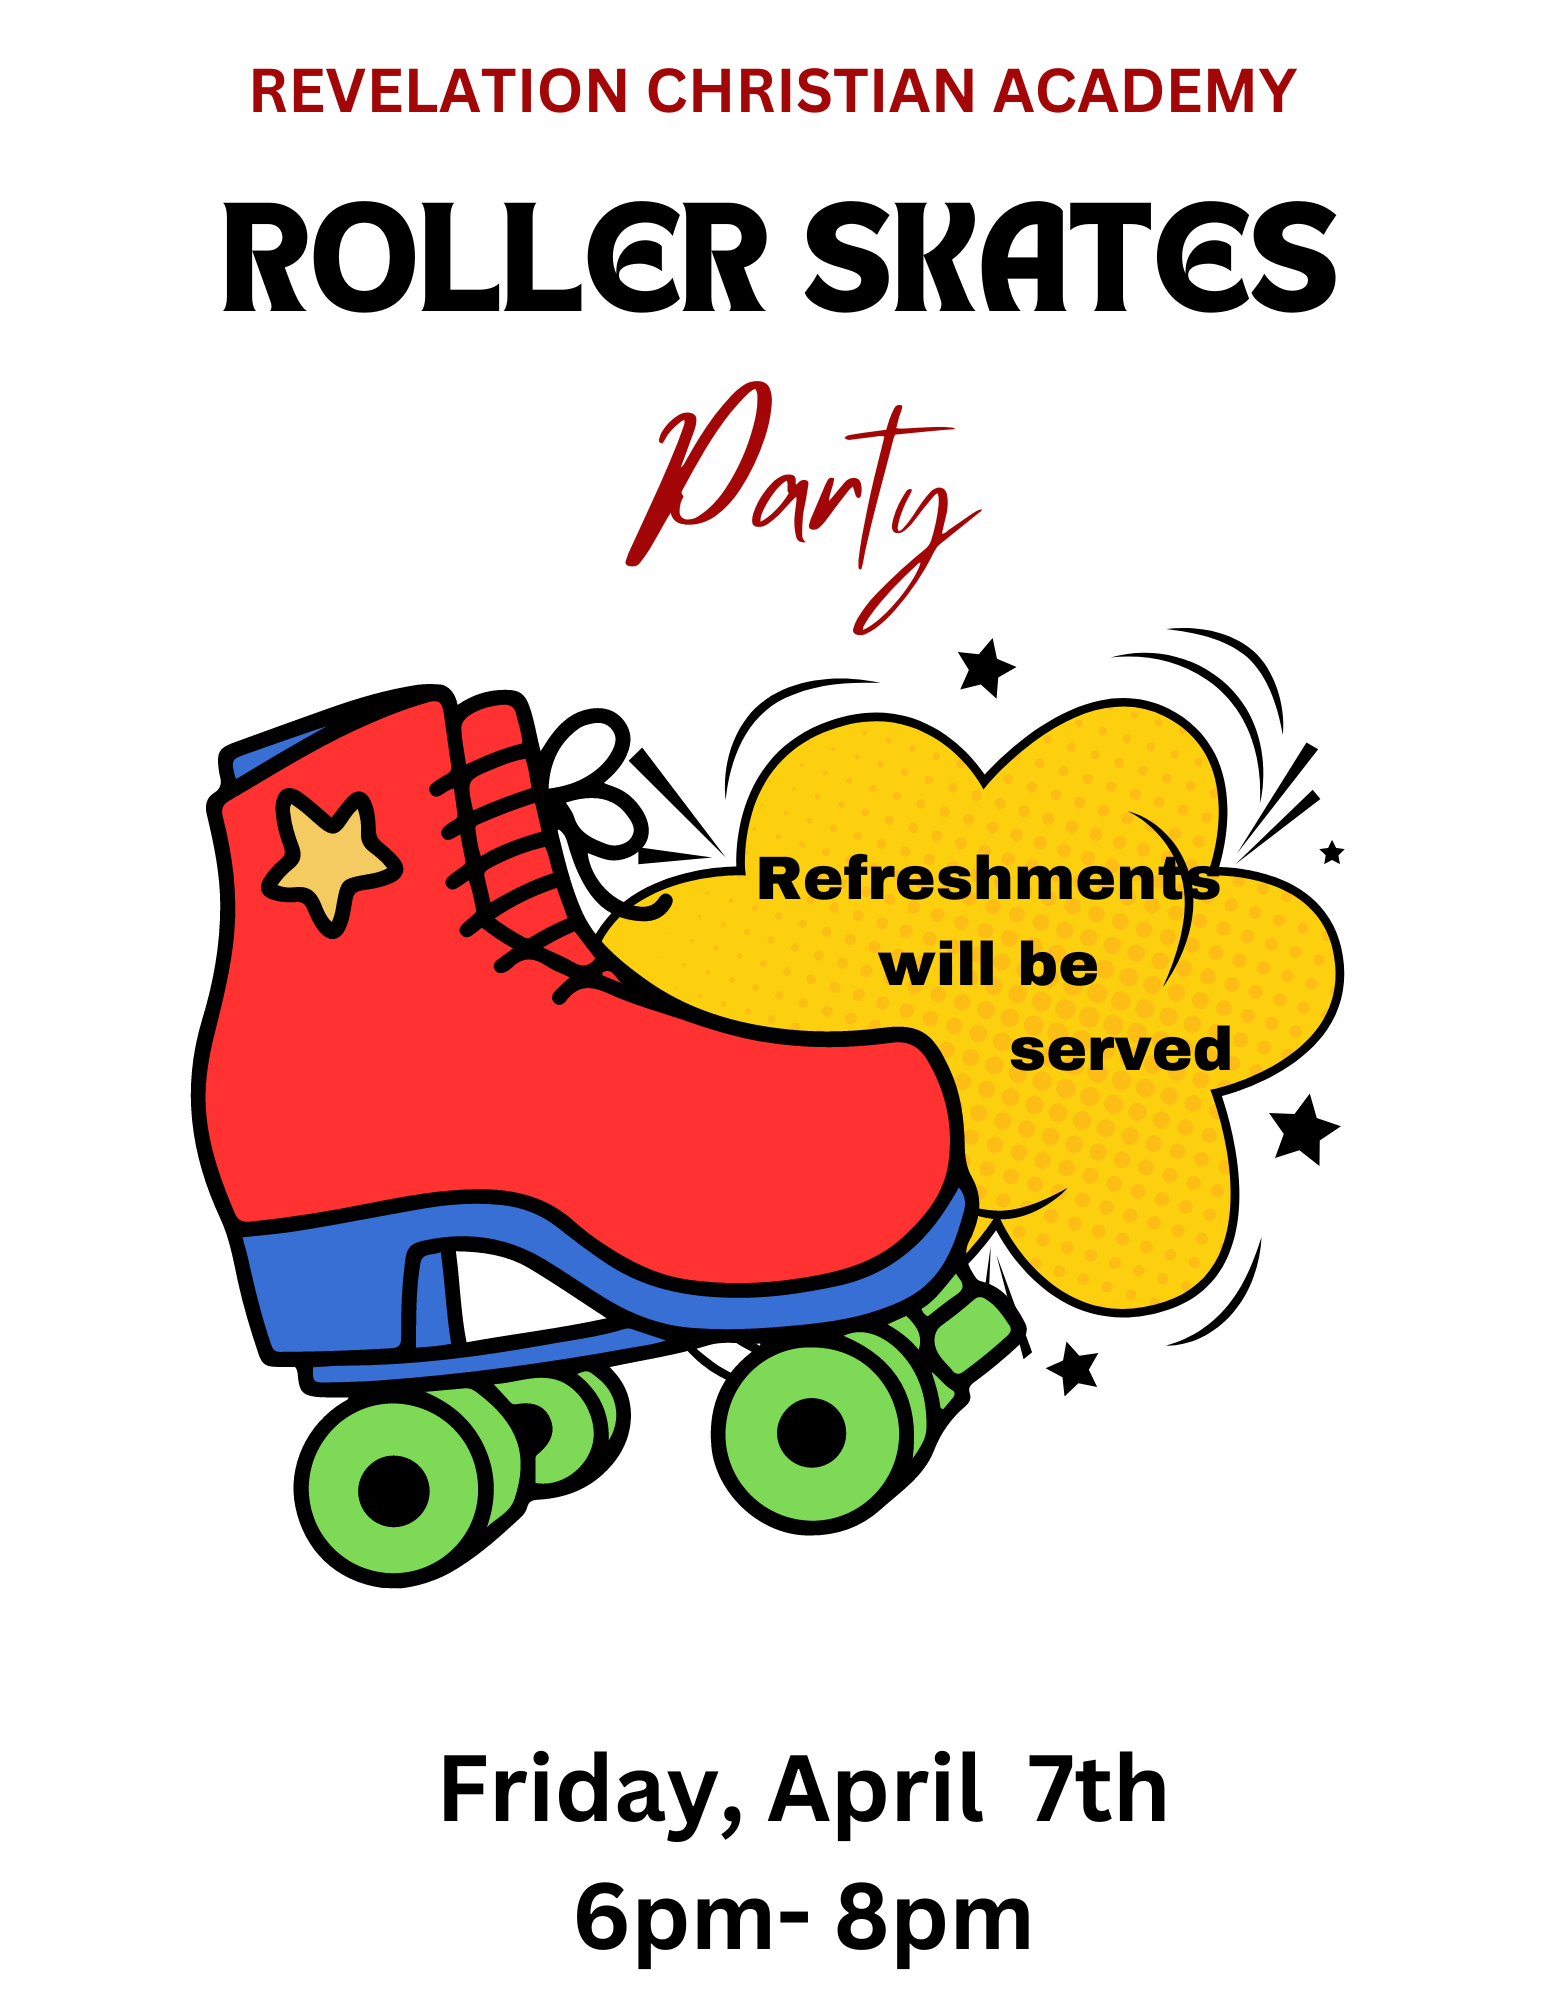 Roller Skates Party - Friday, April 7th